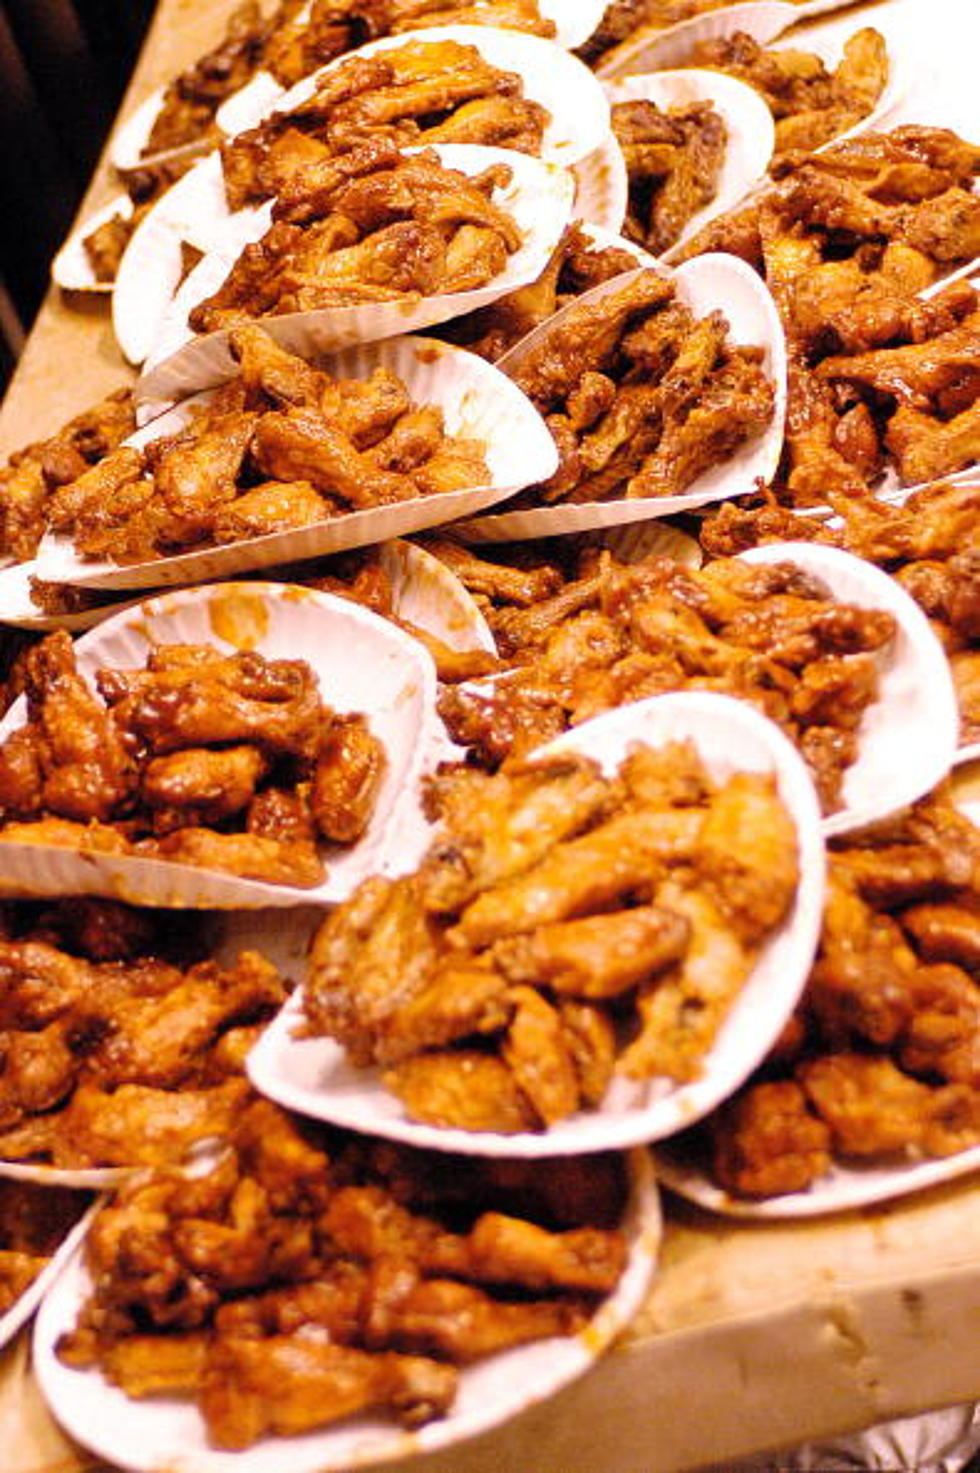 Get Ready for the Buffalo Wing Festival this Weekend